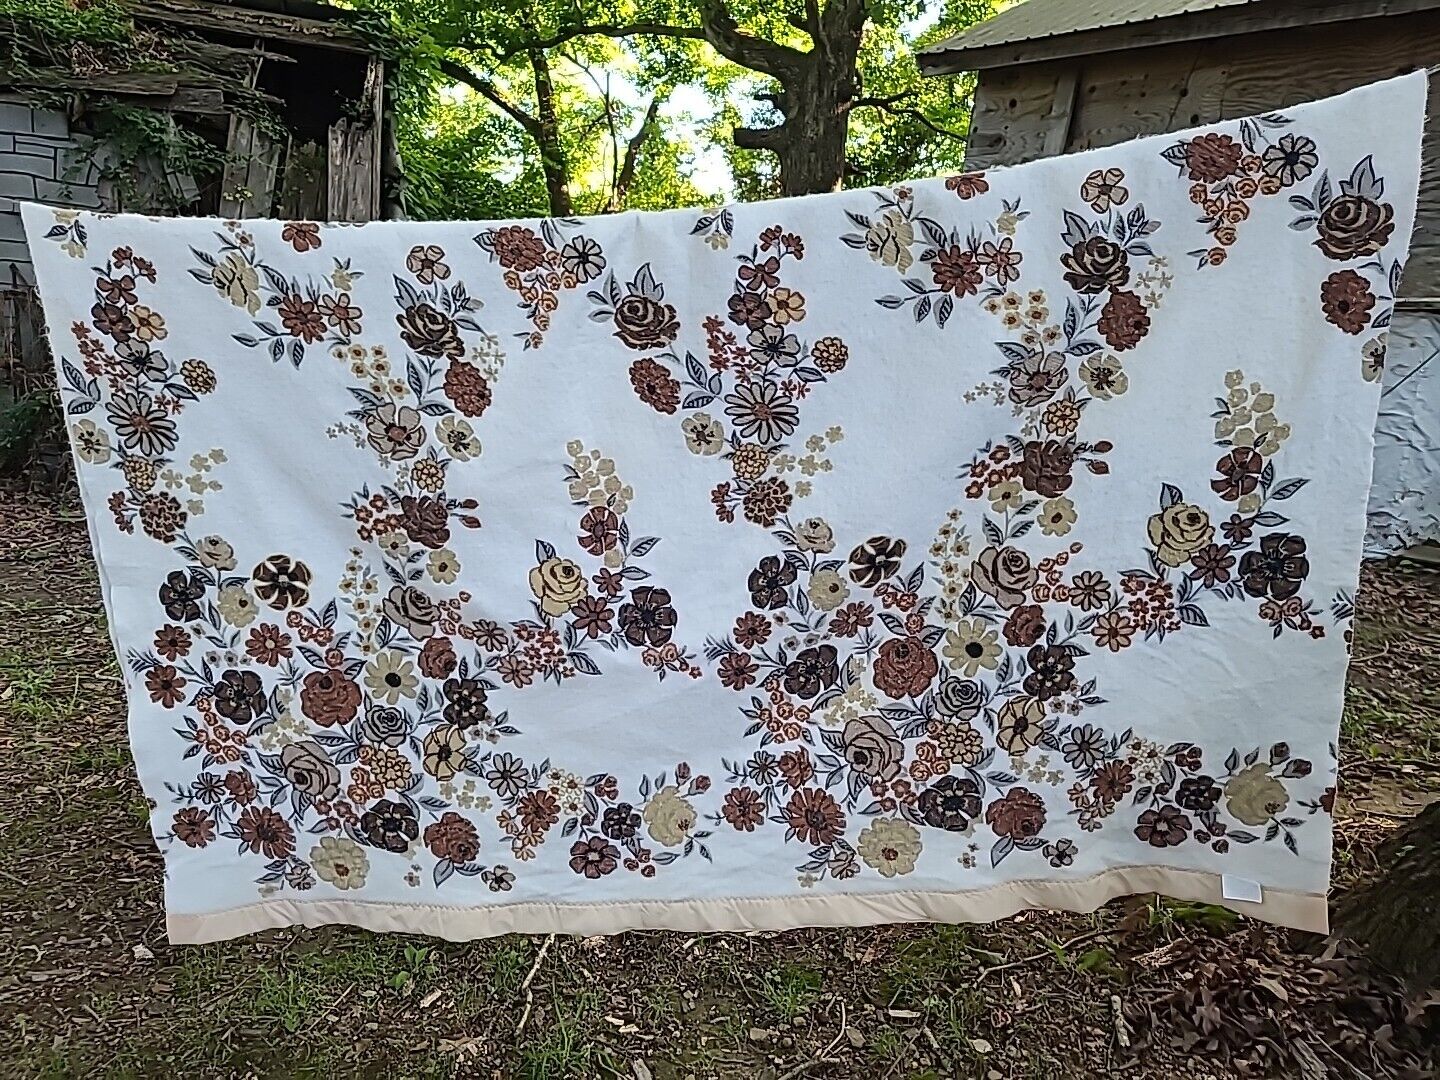 Vintage Chatham Blanket Tan Brown Roses Floral Shabby Acrylic Satin Edge Queen